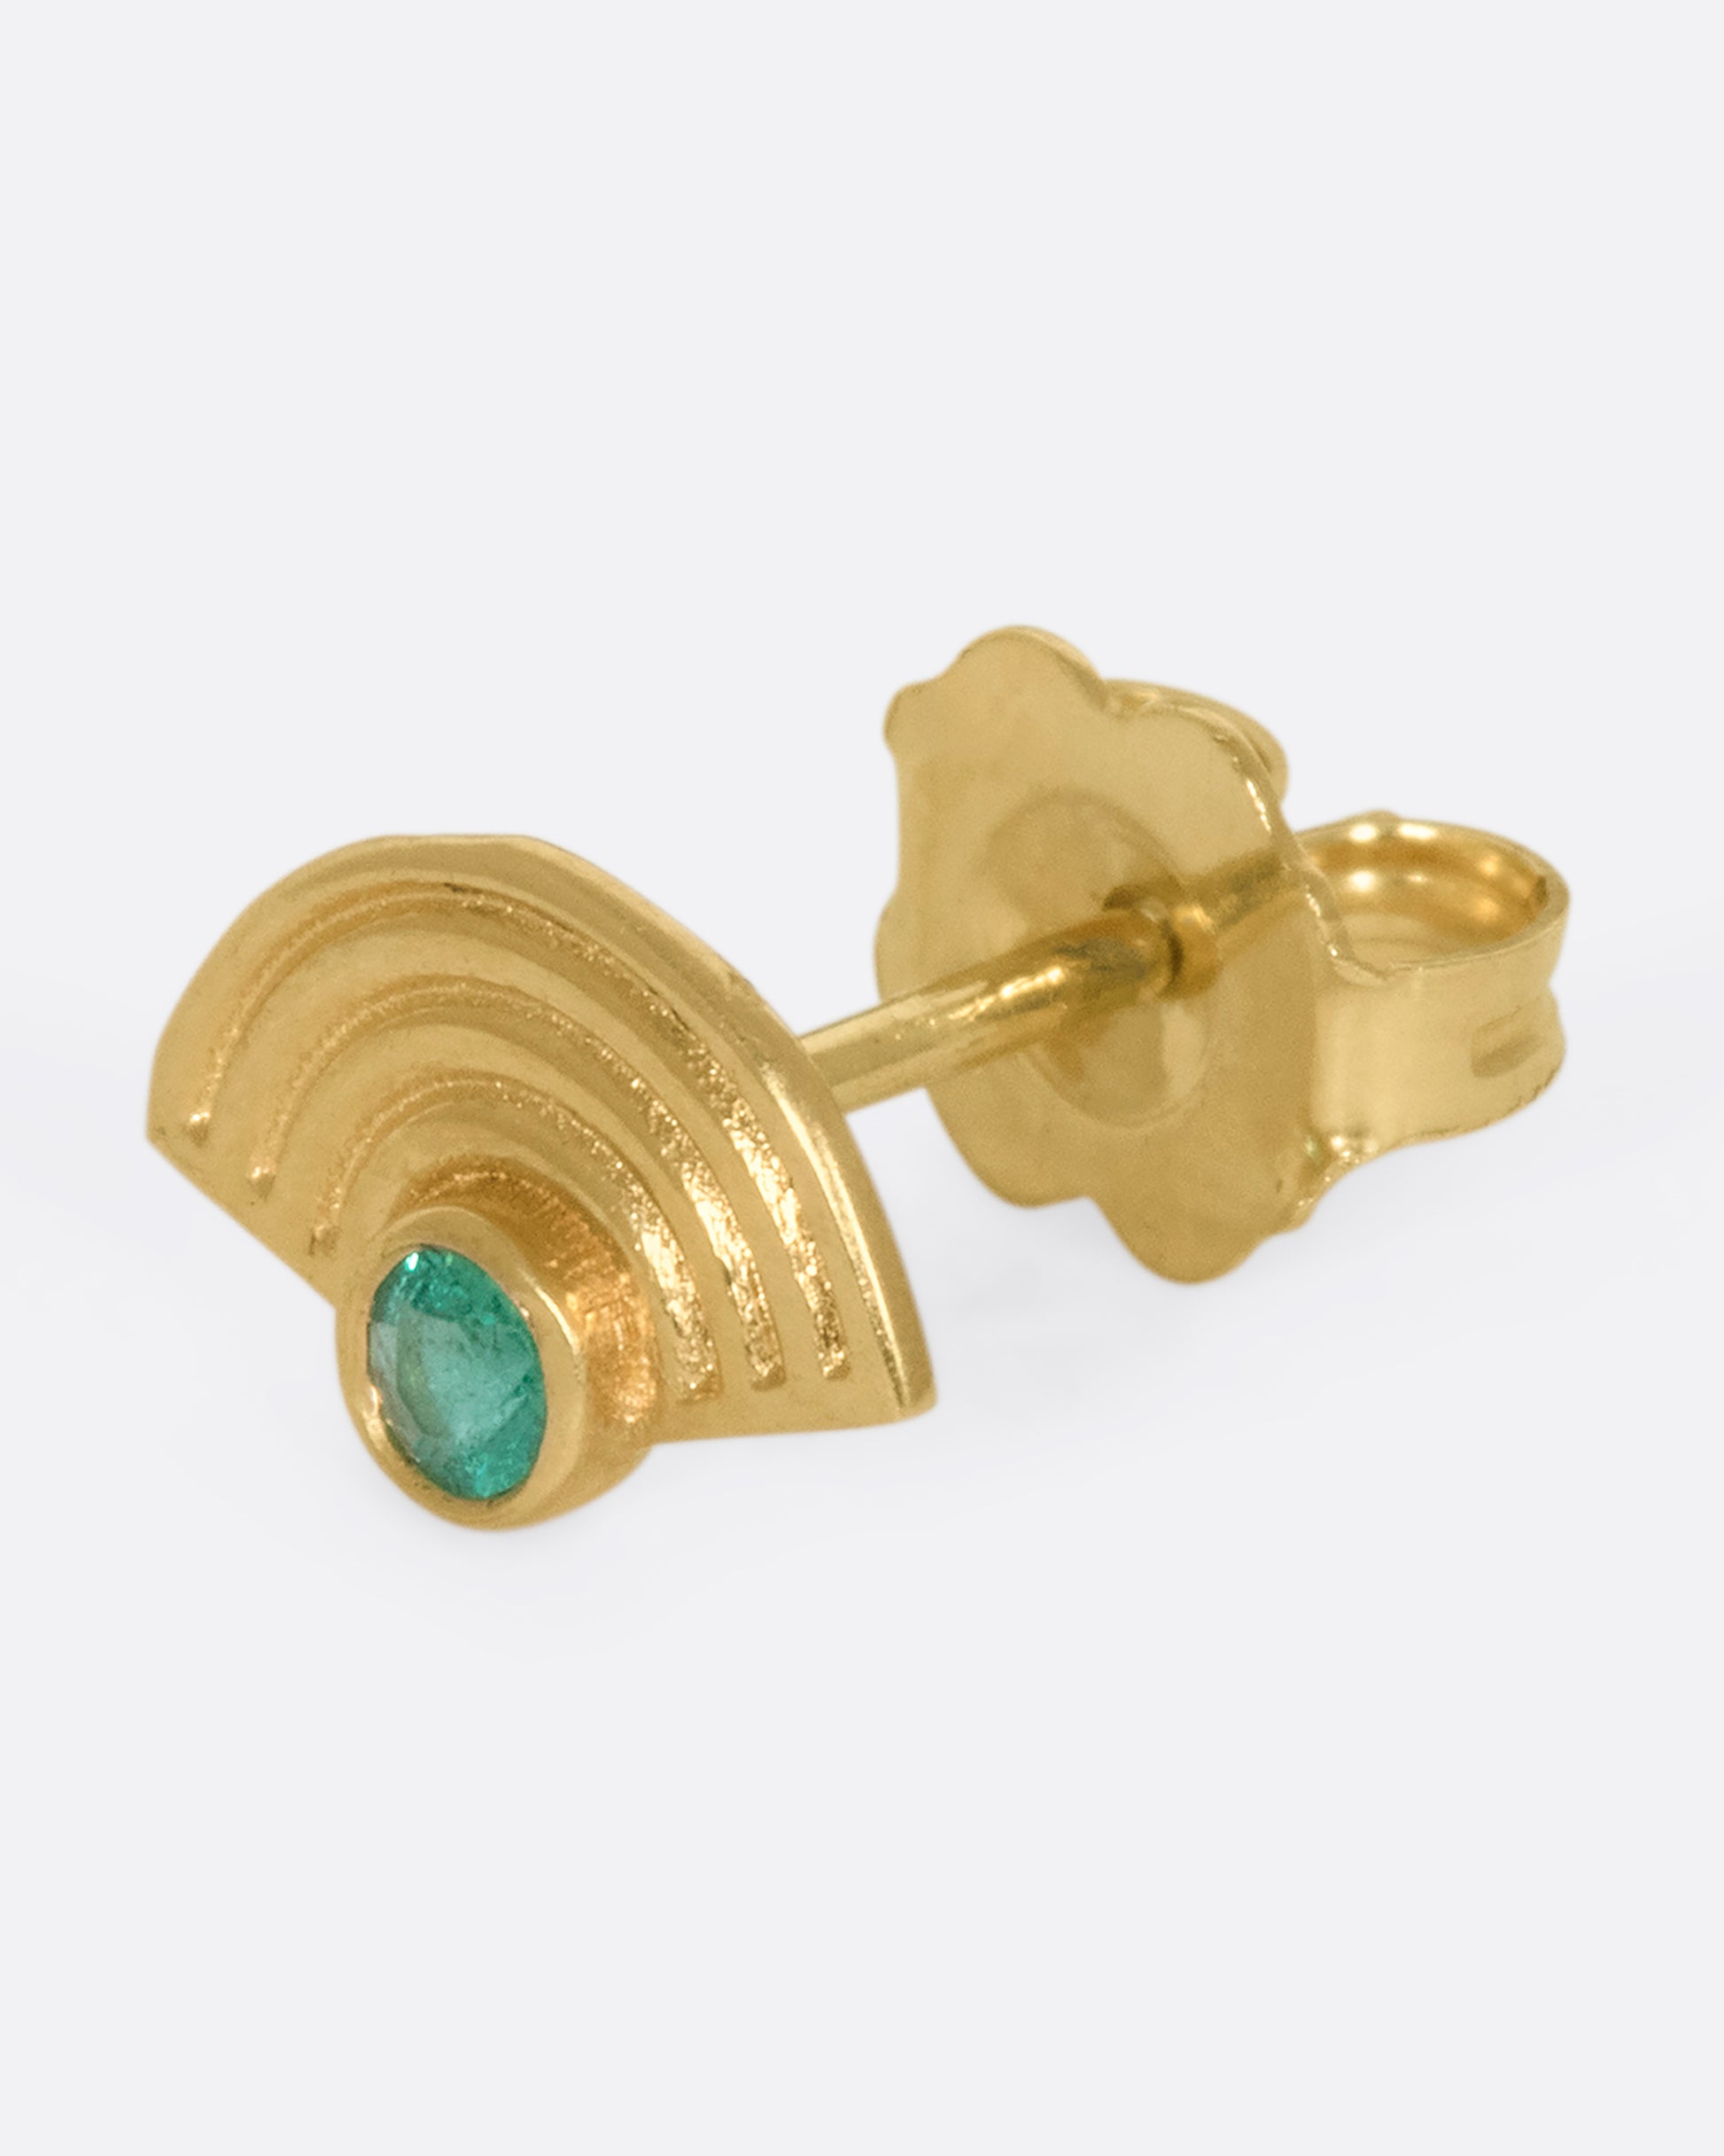 A 14k gold semi-circular spiral stud with an emerald glowing in the center